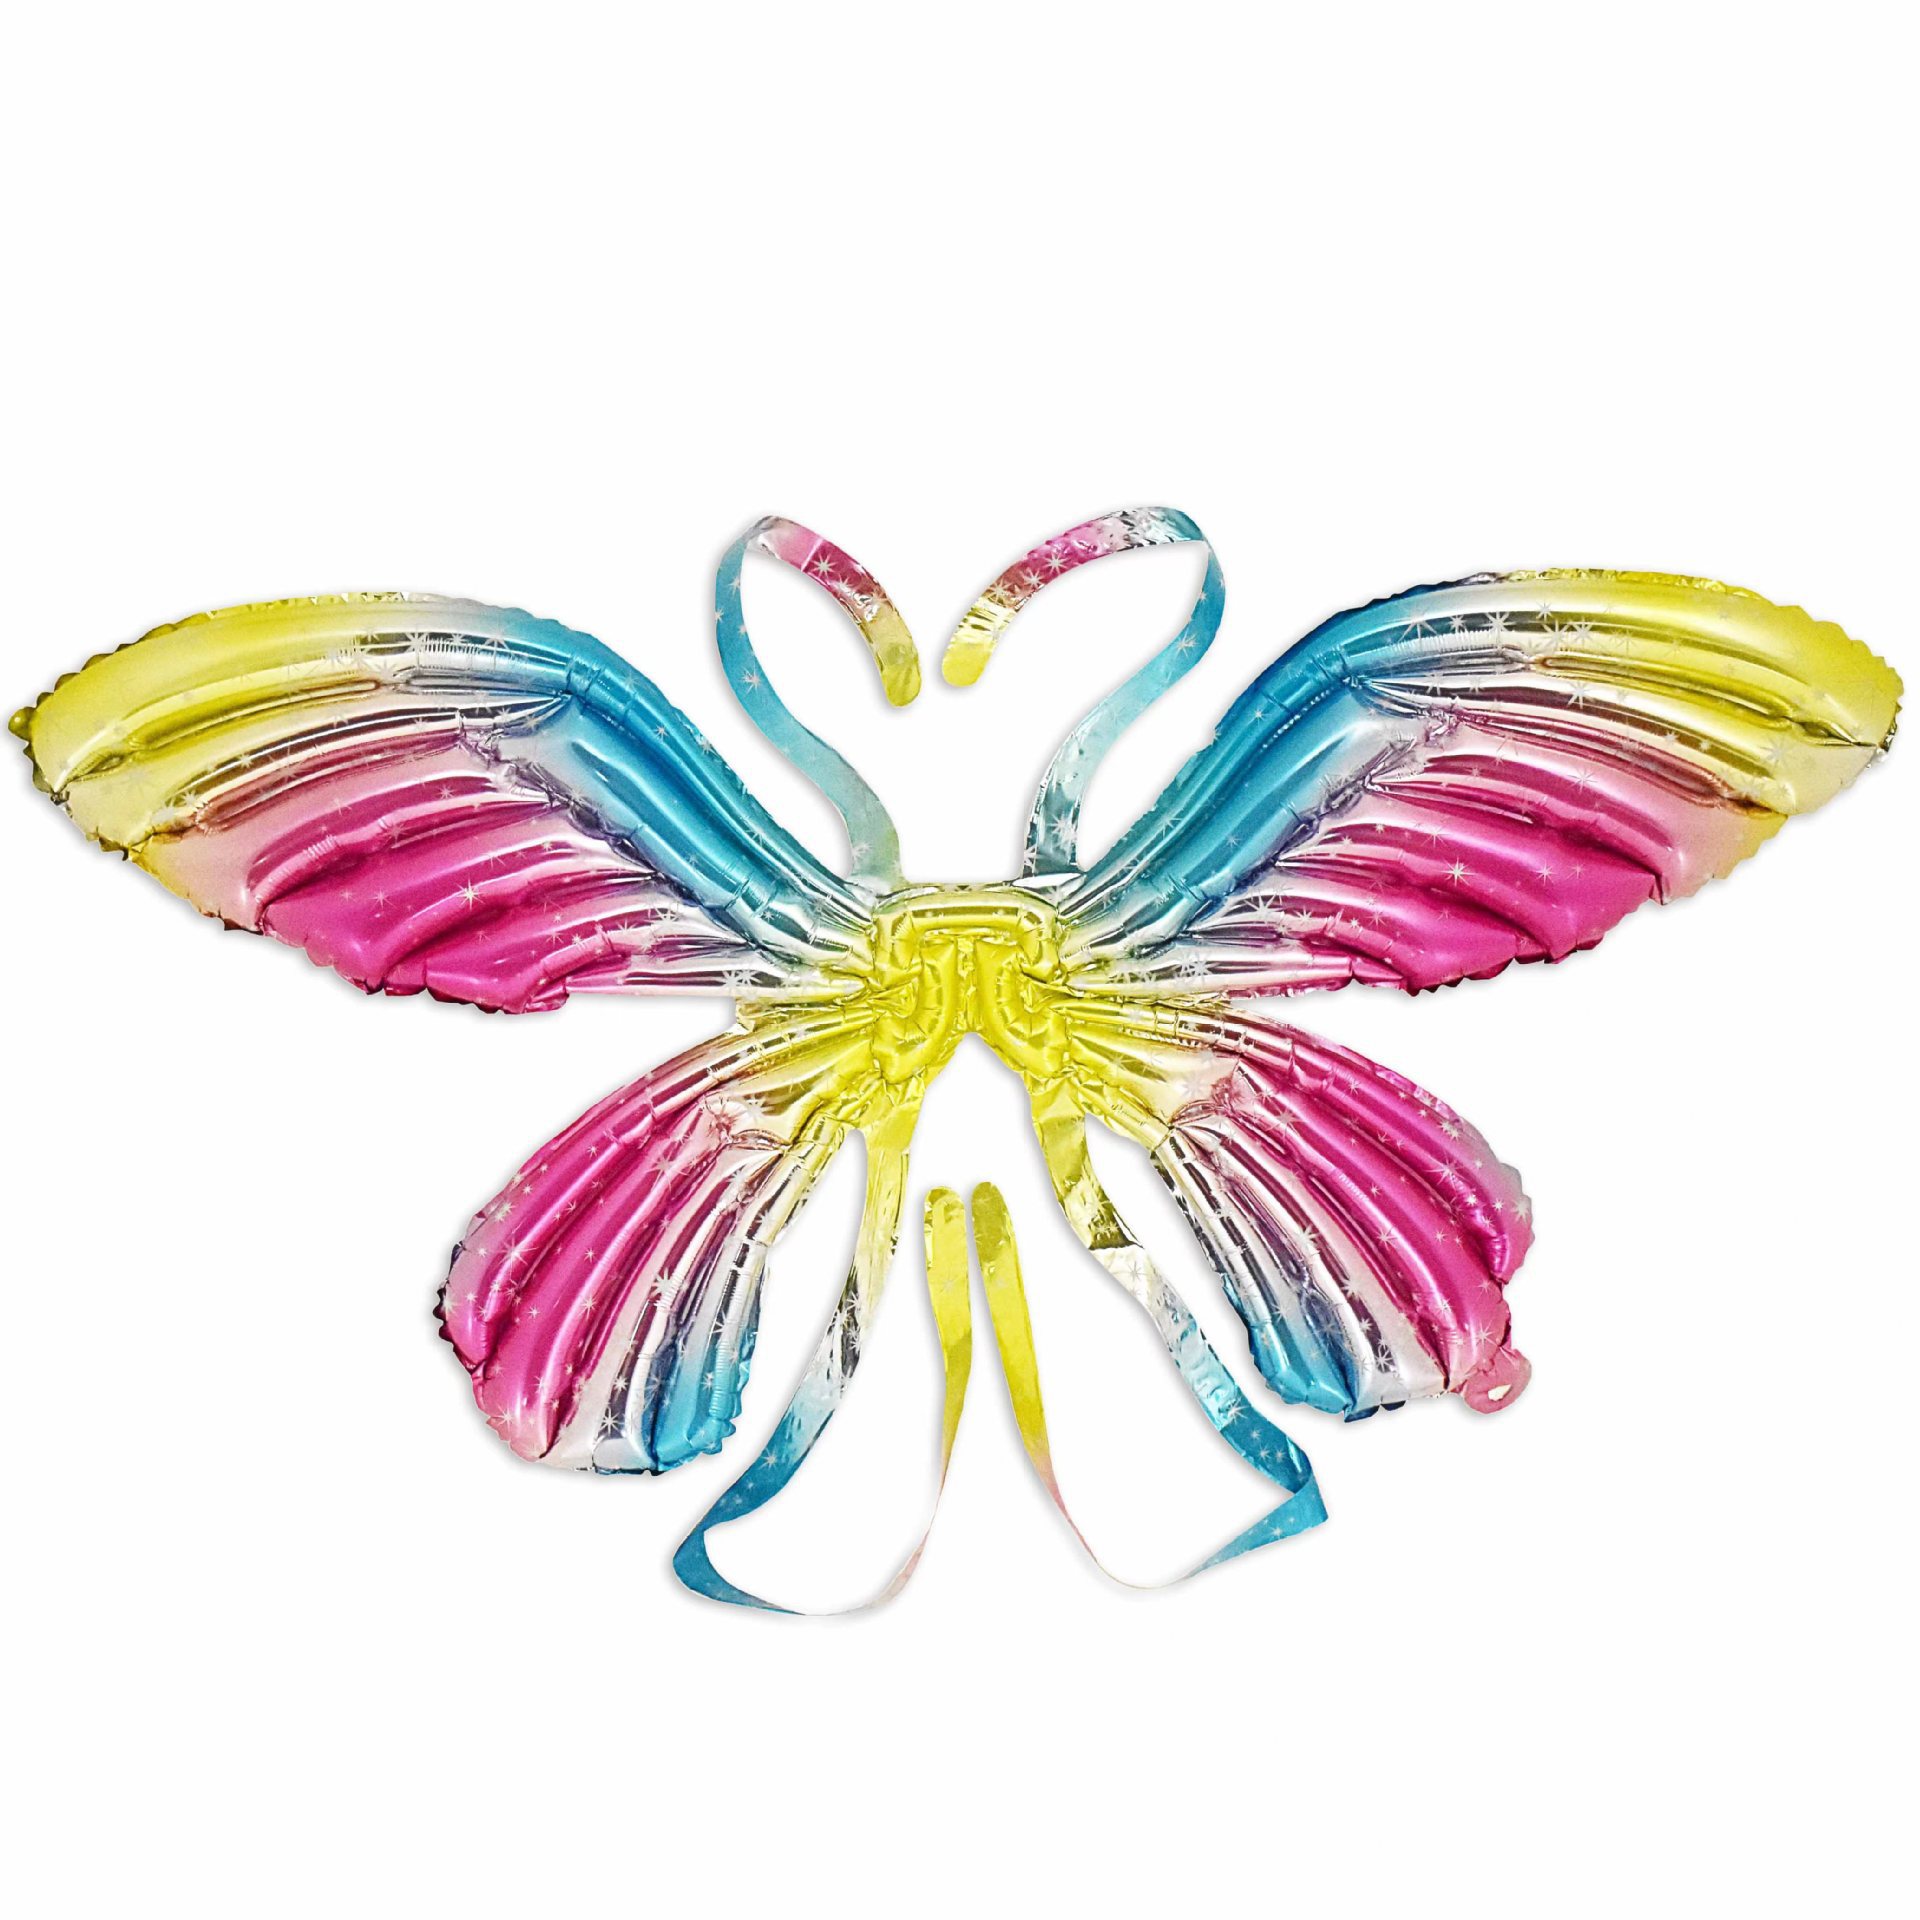 Tiktok Stall Hot Sale Victoria's Secret Back-Mounted Large Butterfly Wings Balloon Angel Wings Birthday Photo Decoration